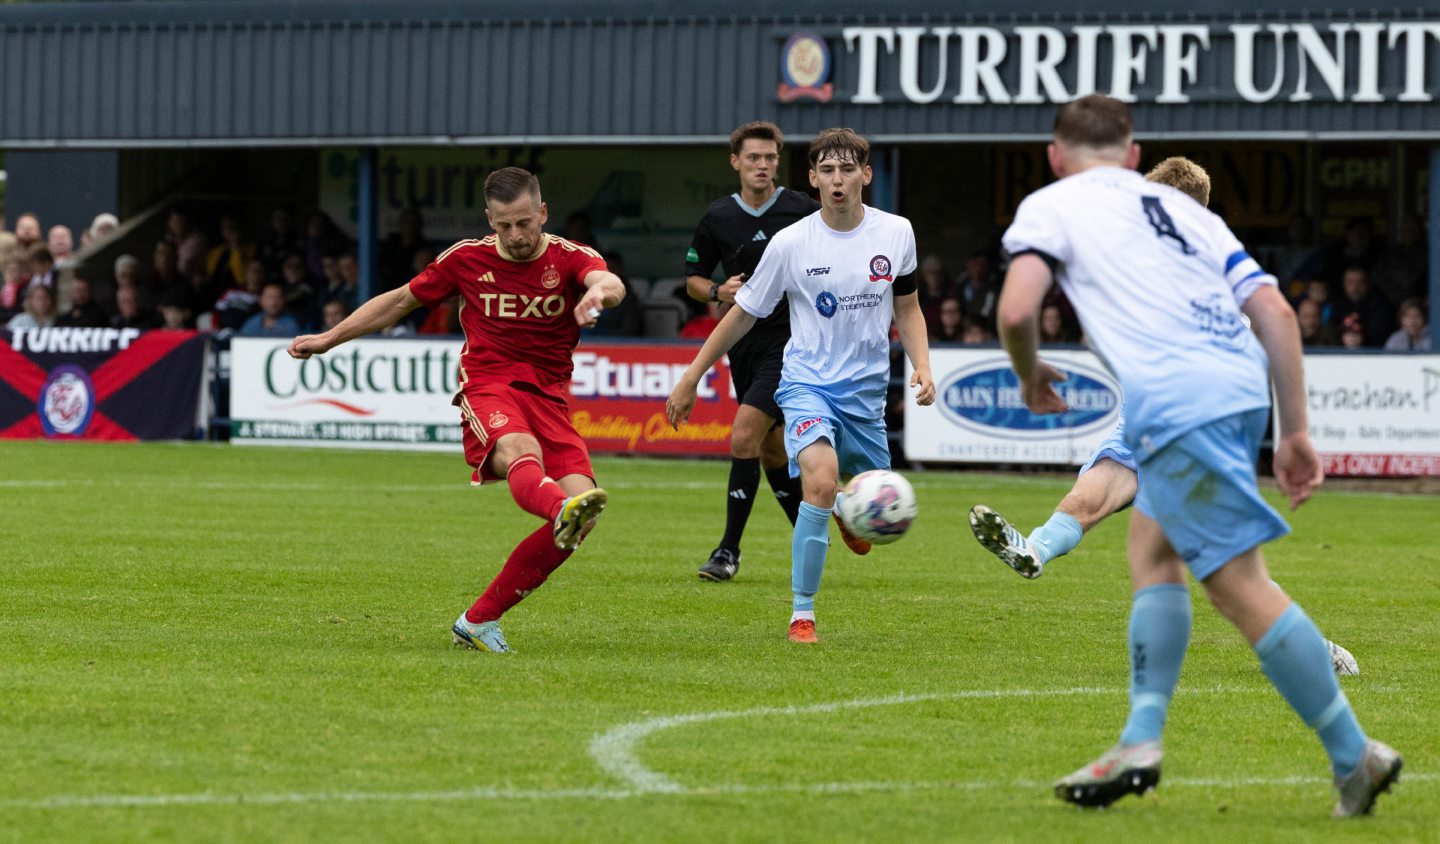 Aberdeen's Ylber Ramadani kicking the ball during a friendly against Turriff United